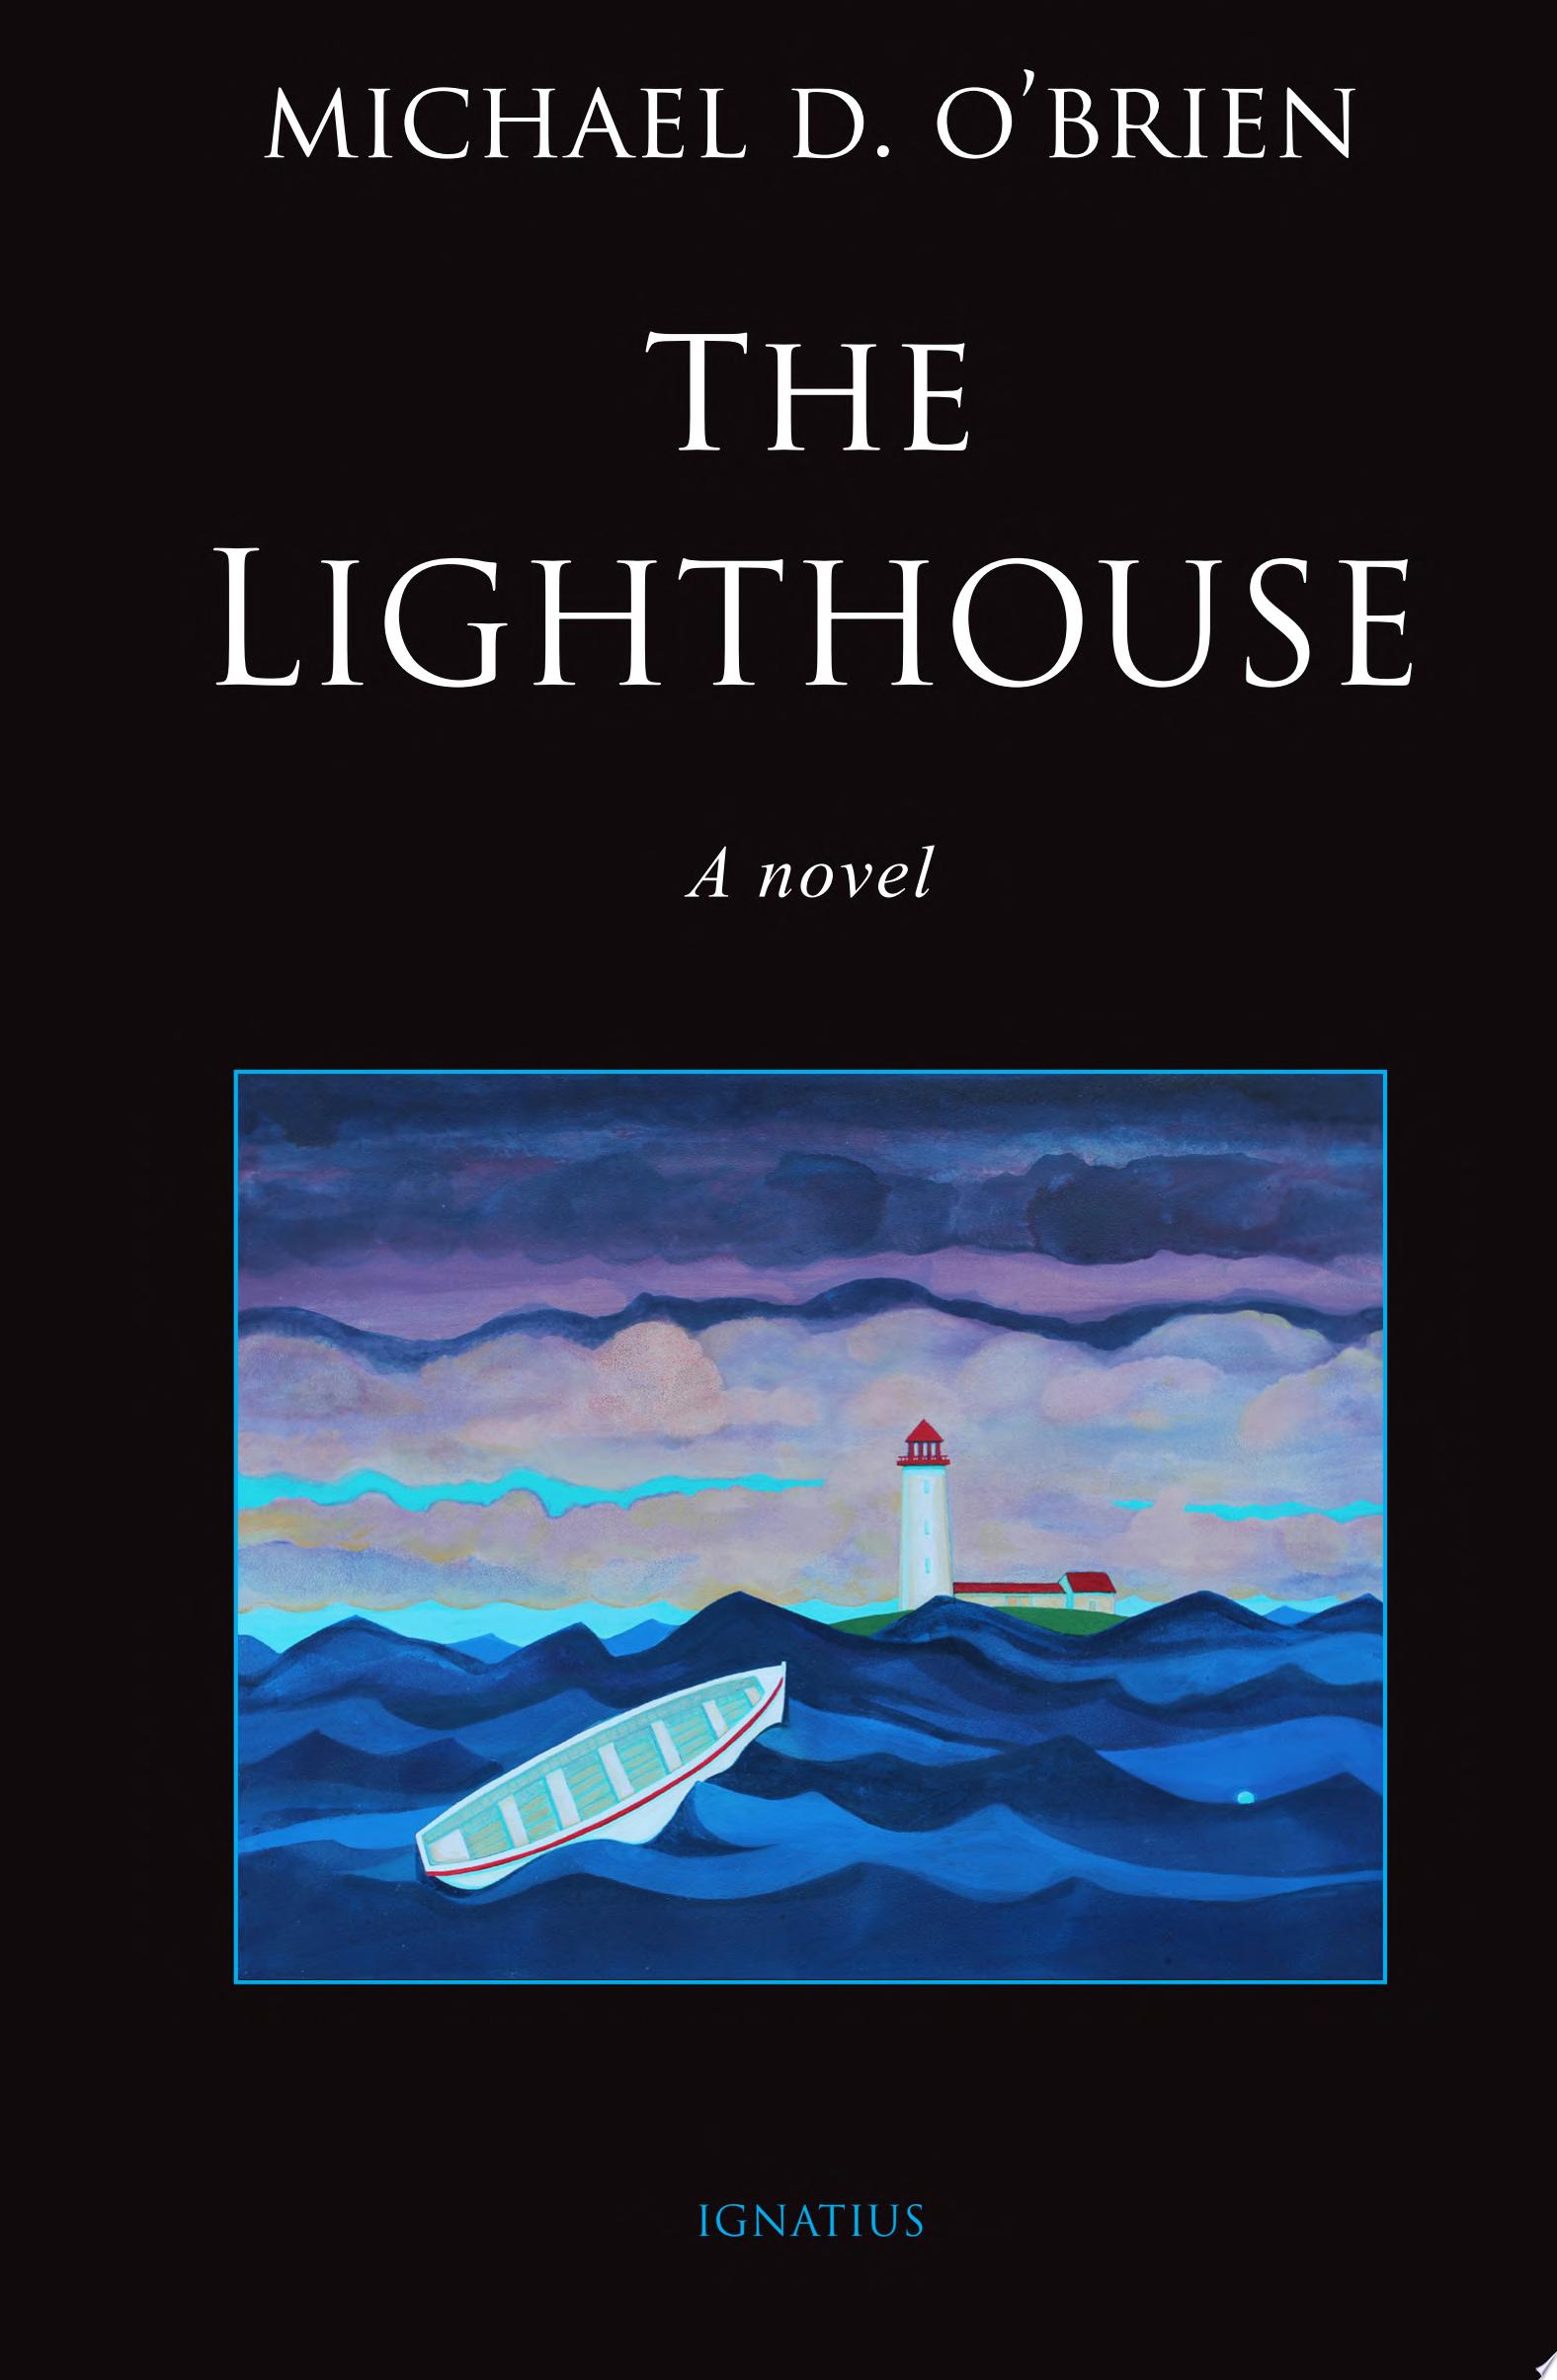 Image for "The Lighthouse"